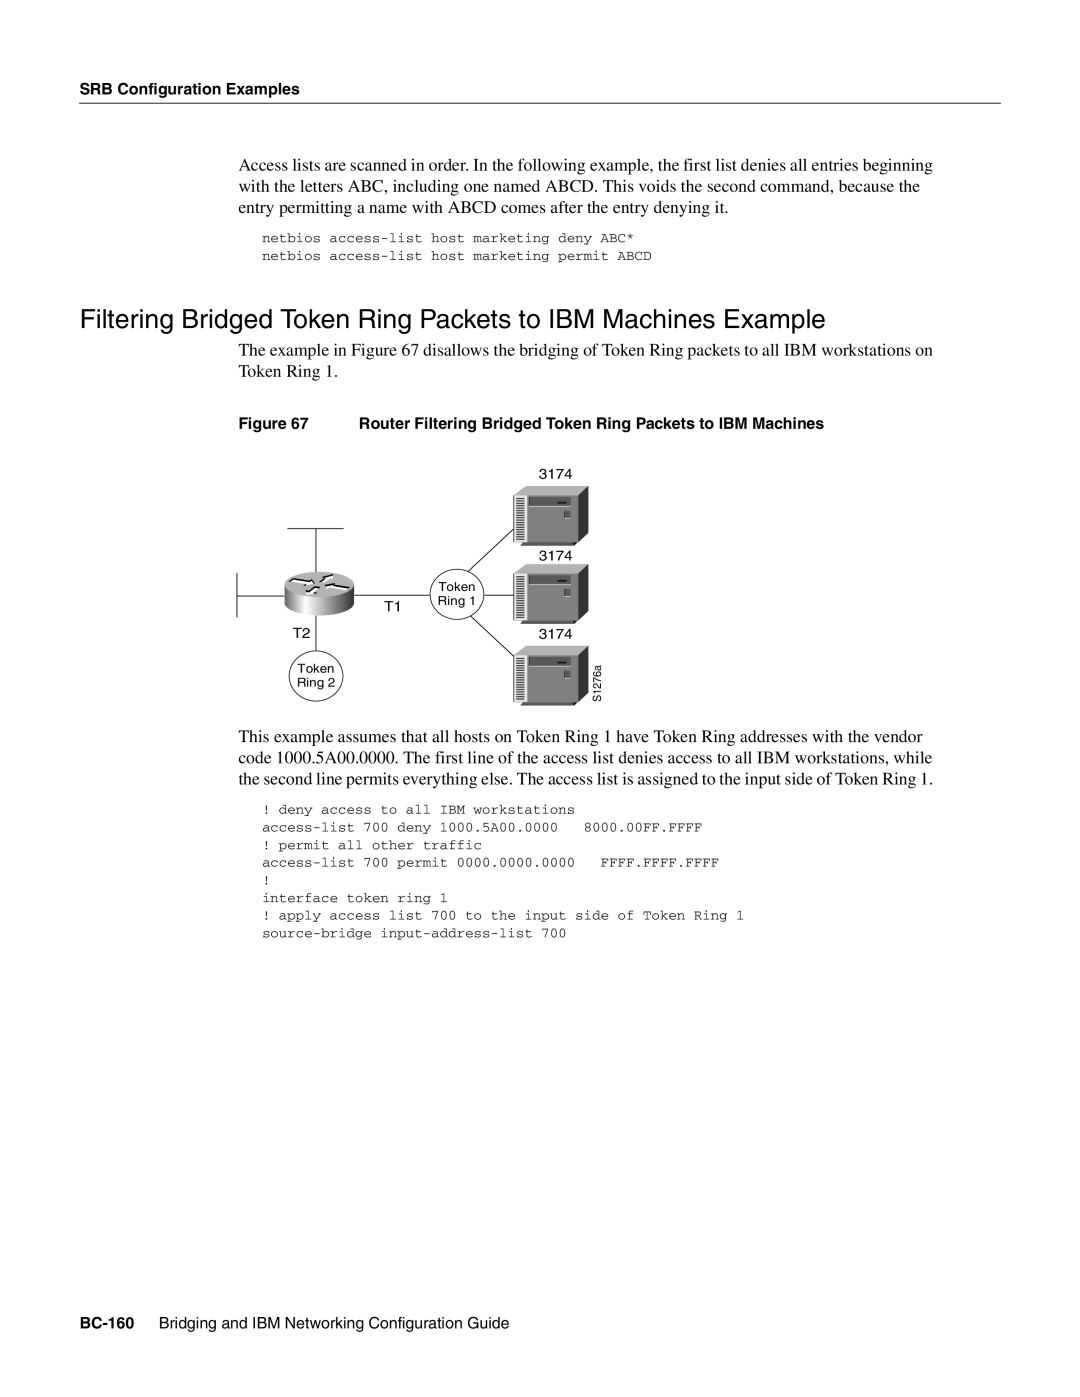 Cisco Systems BC-109 manual Filtering Bridged Token Ring Packets to IBM Machines Example 